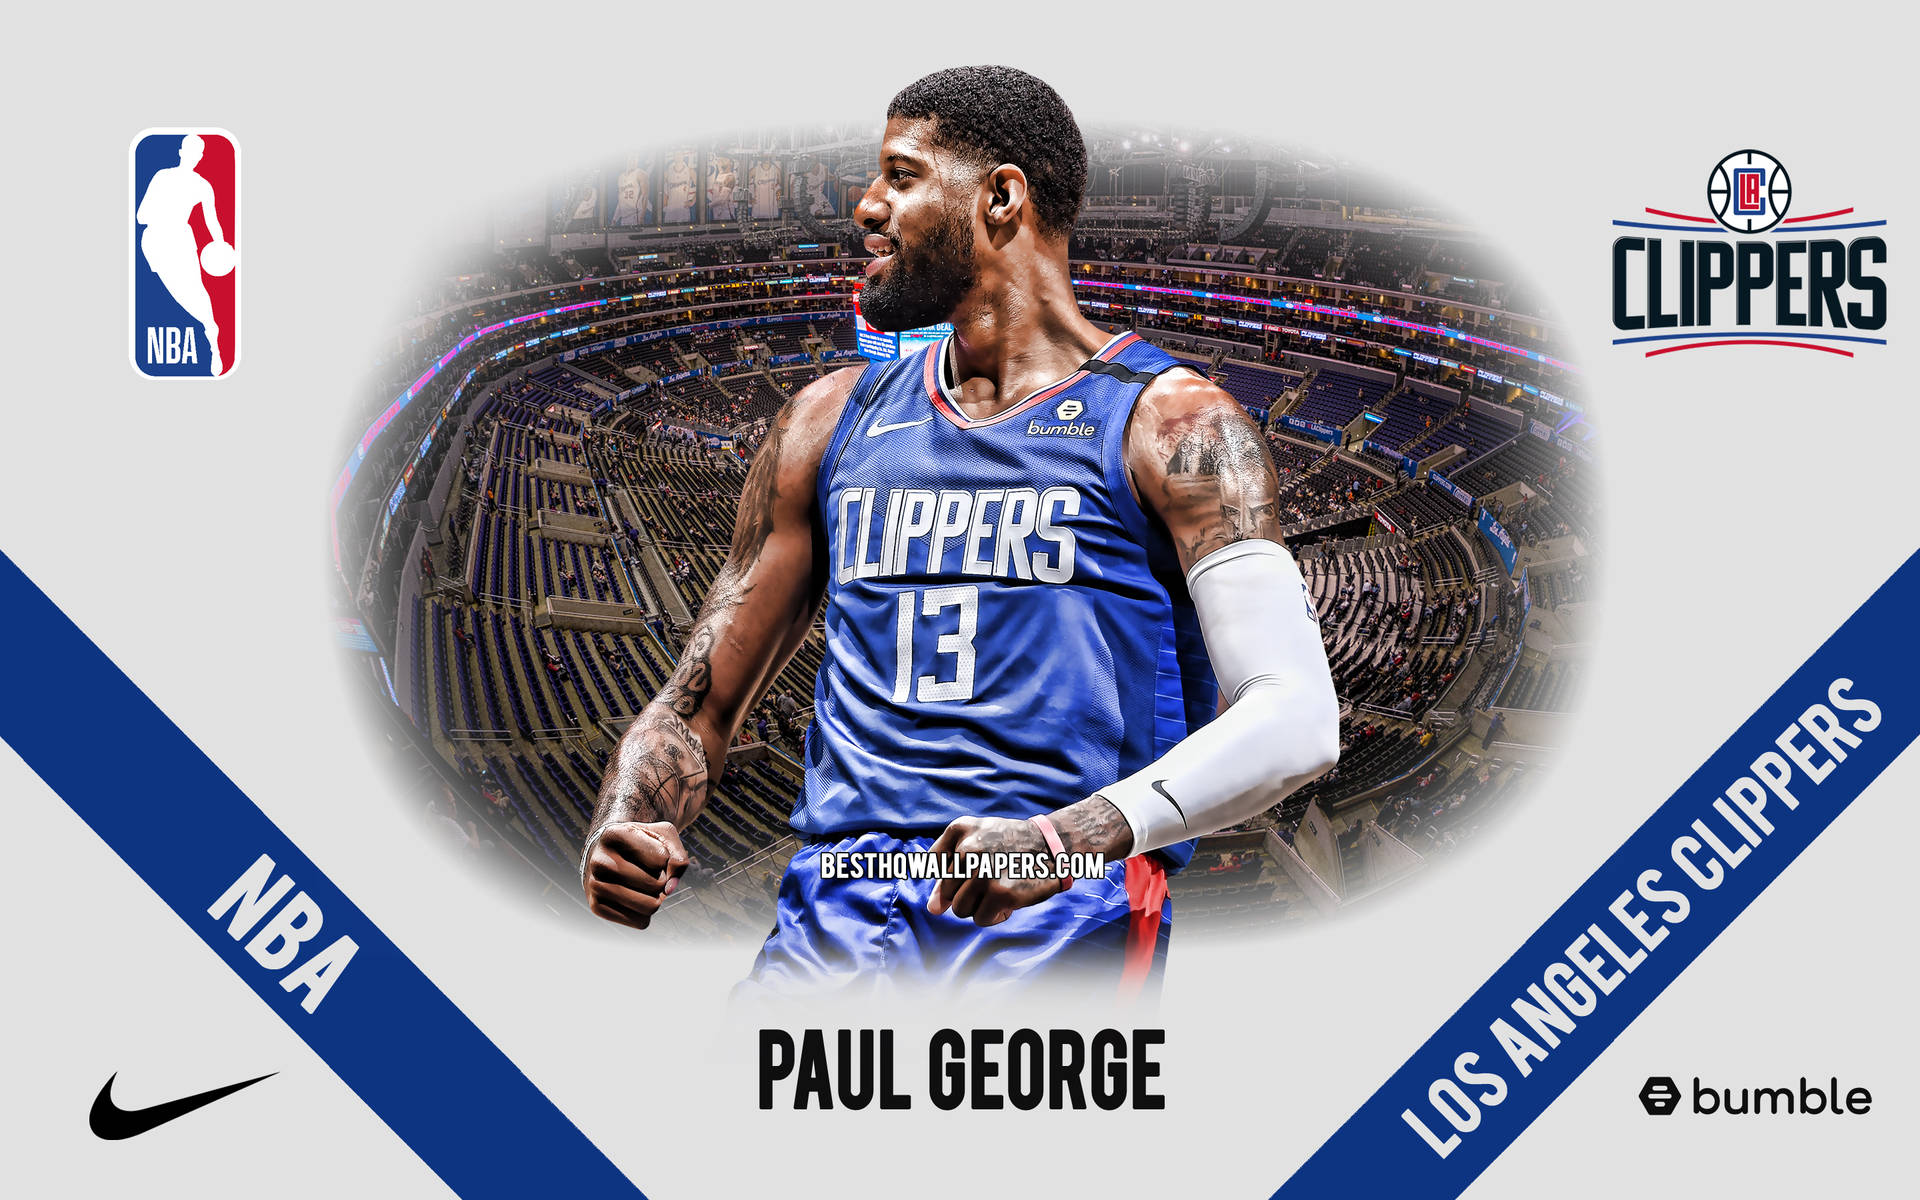 Paul George Nba Arena Poster Background